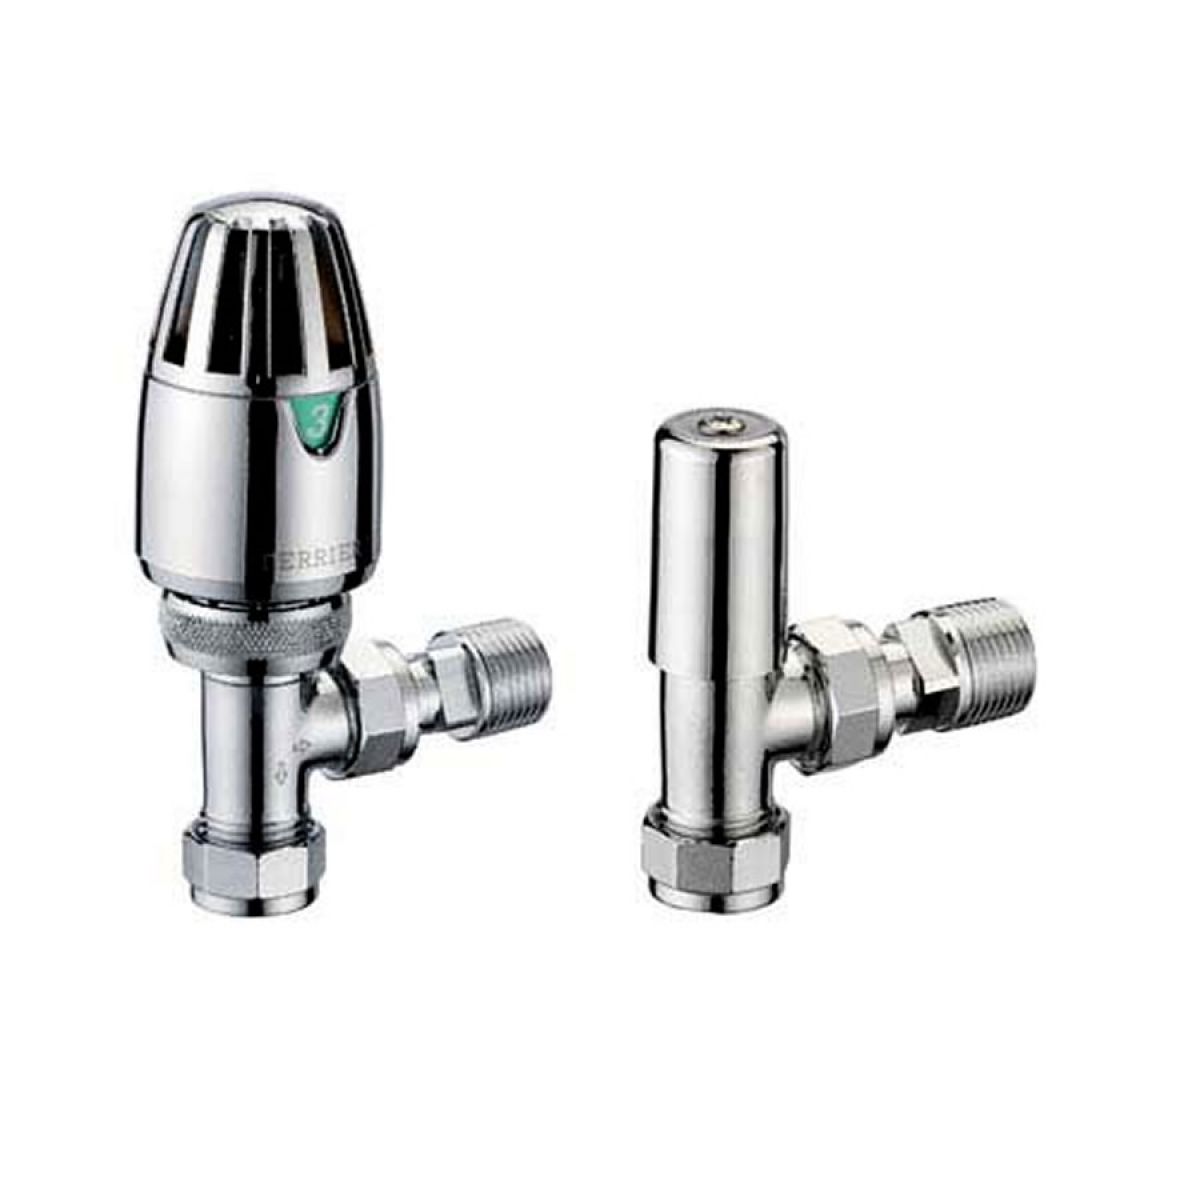 15mm thermostatic radiator valve and standard valve Terrier Pegler twin pack 